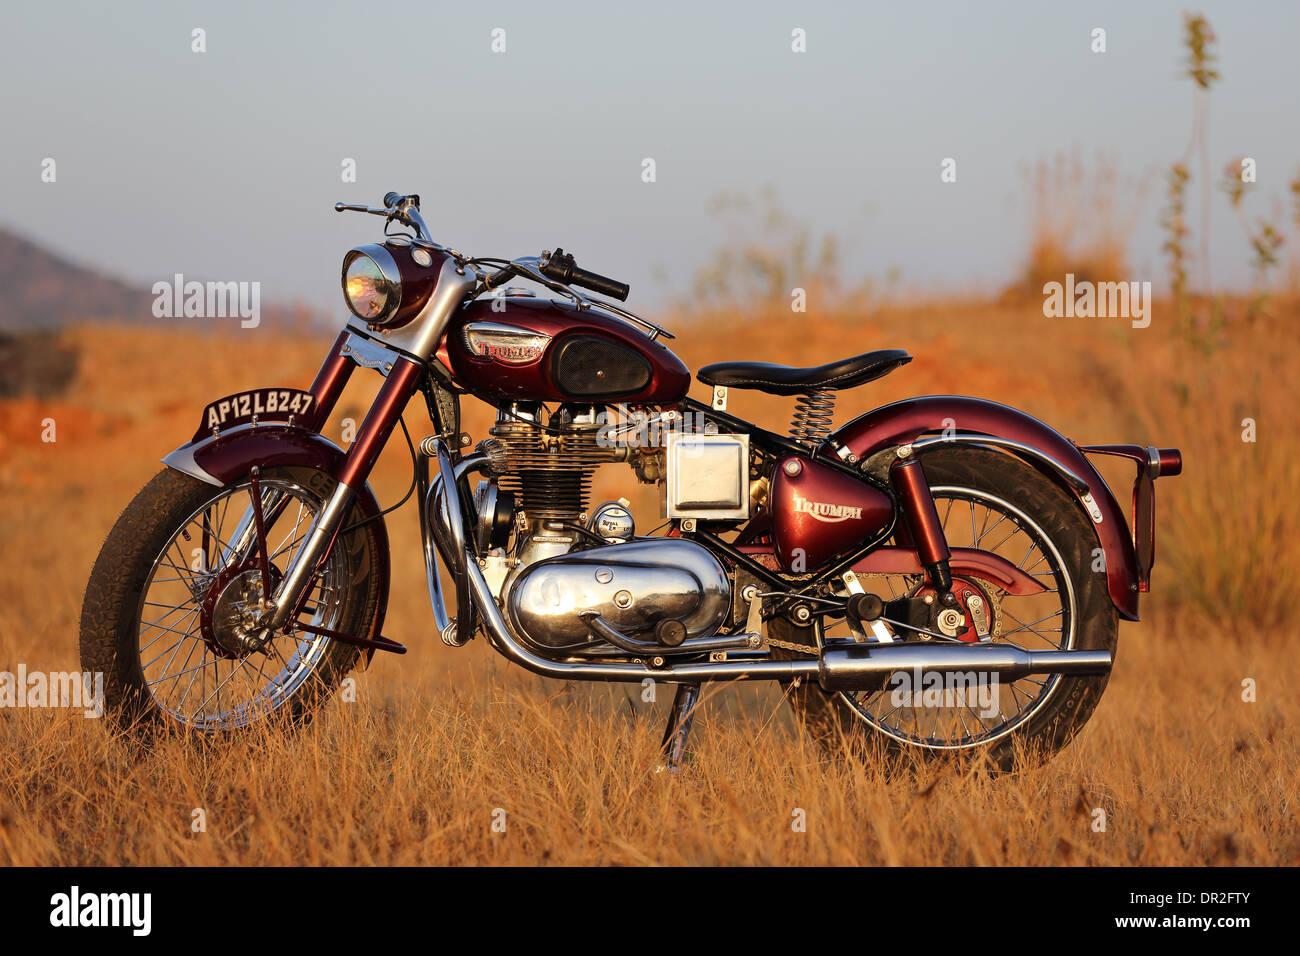 Royal enfield motorbike hi-res stock photography and images - Alamy